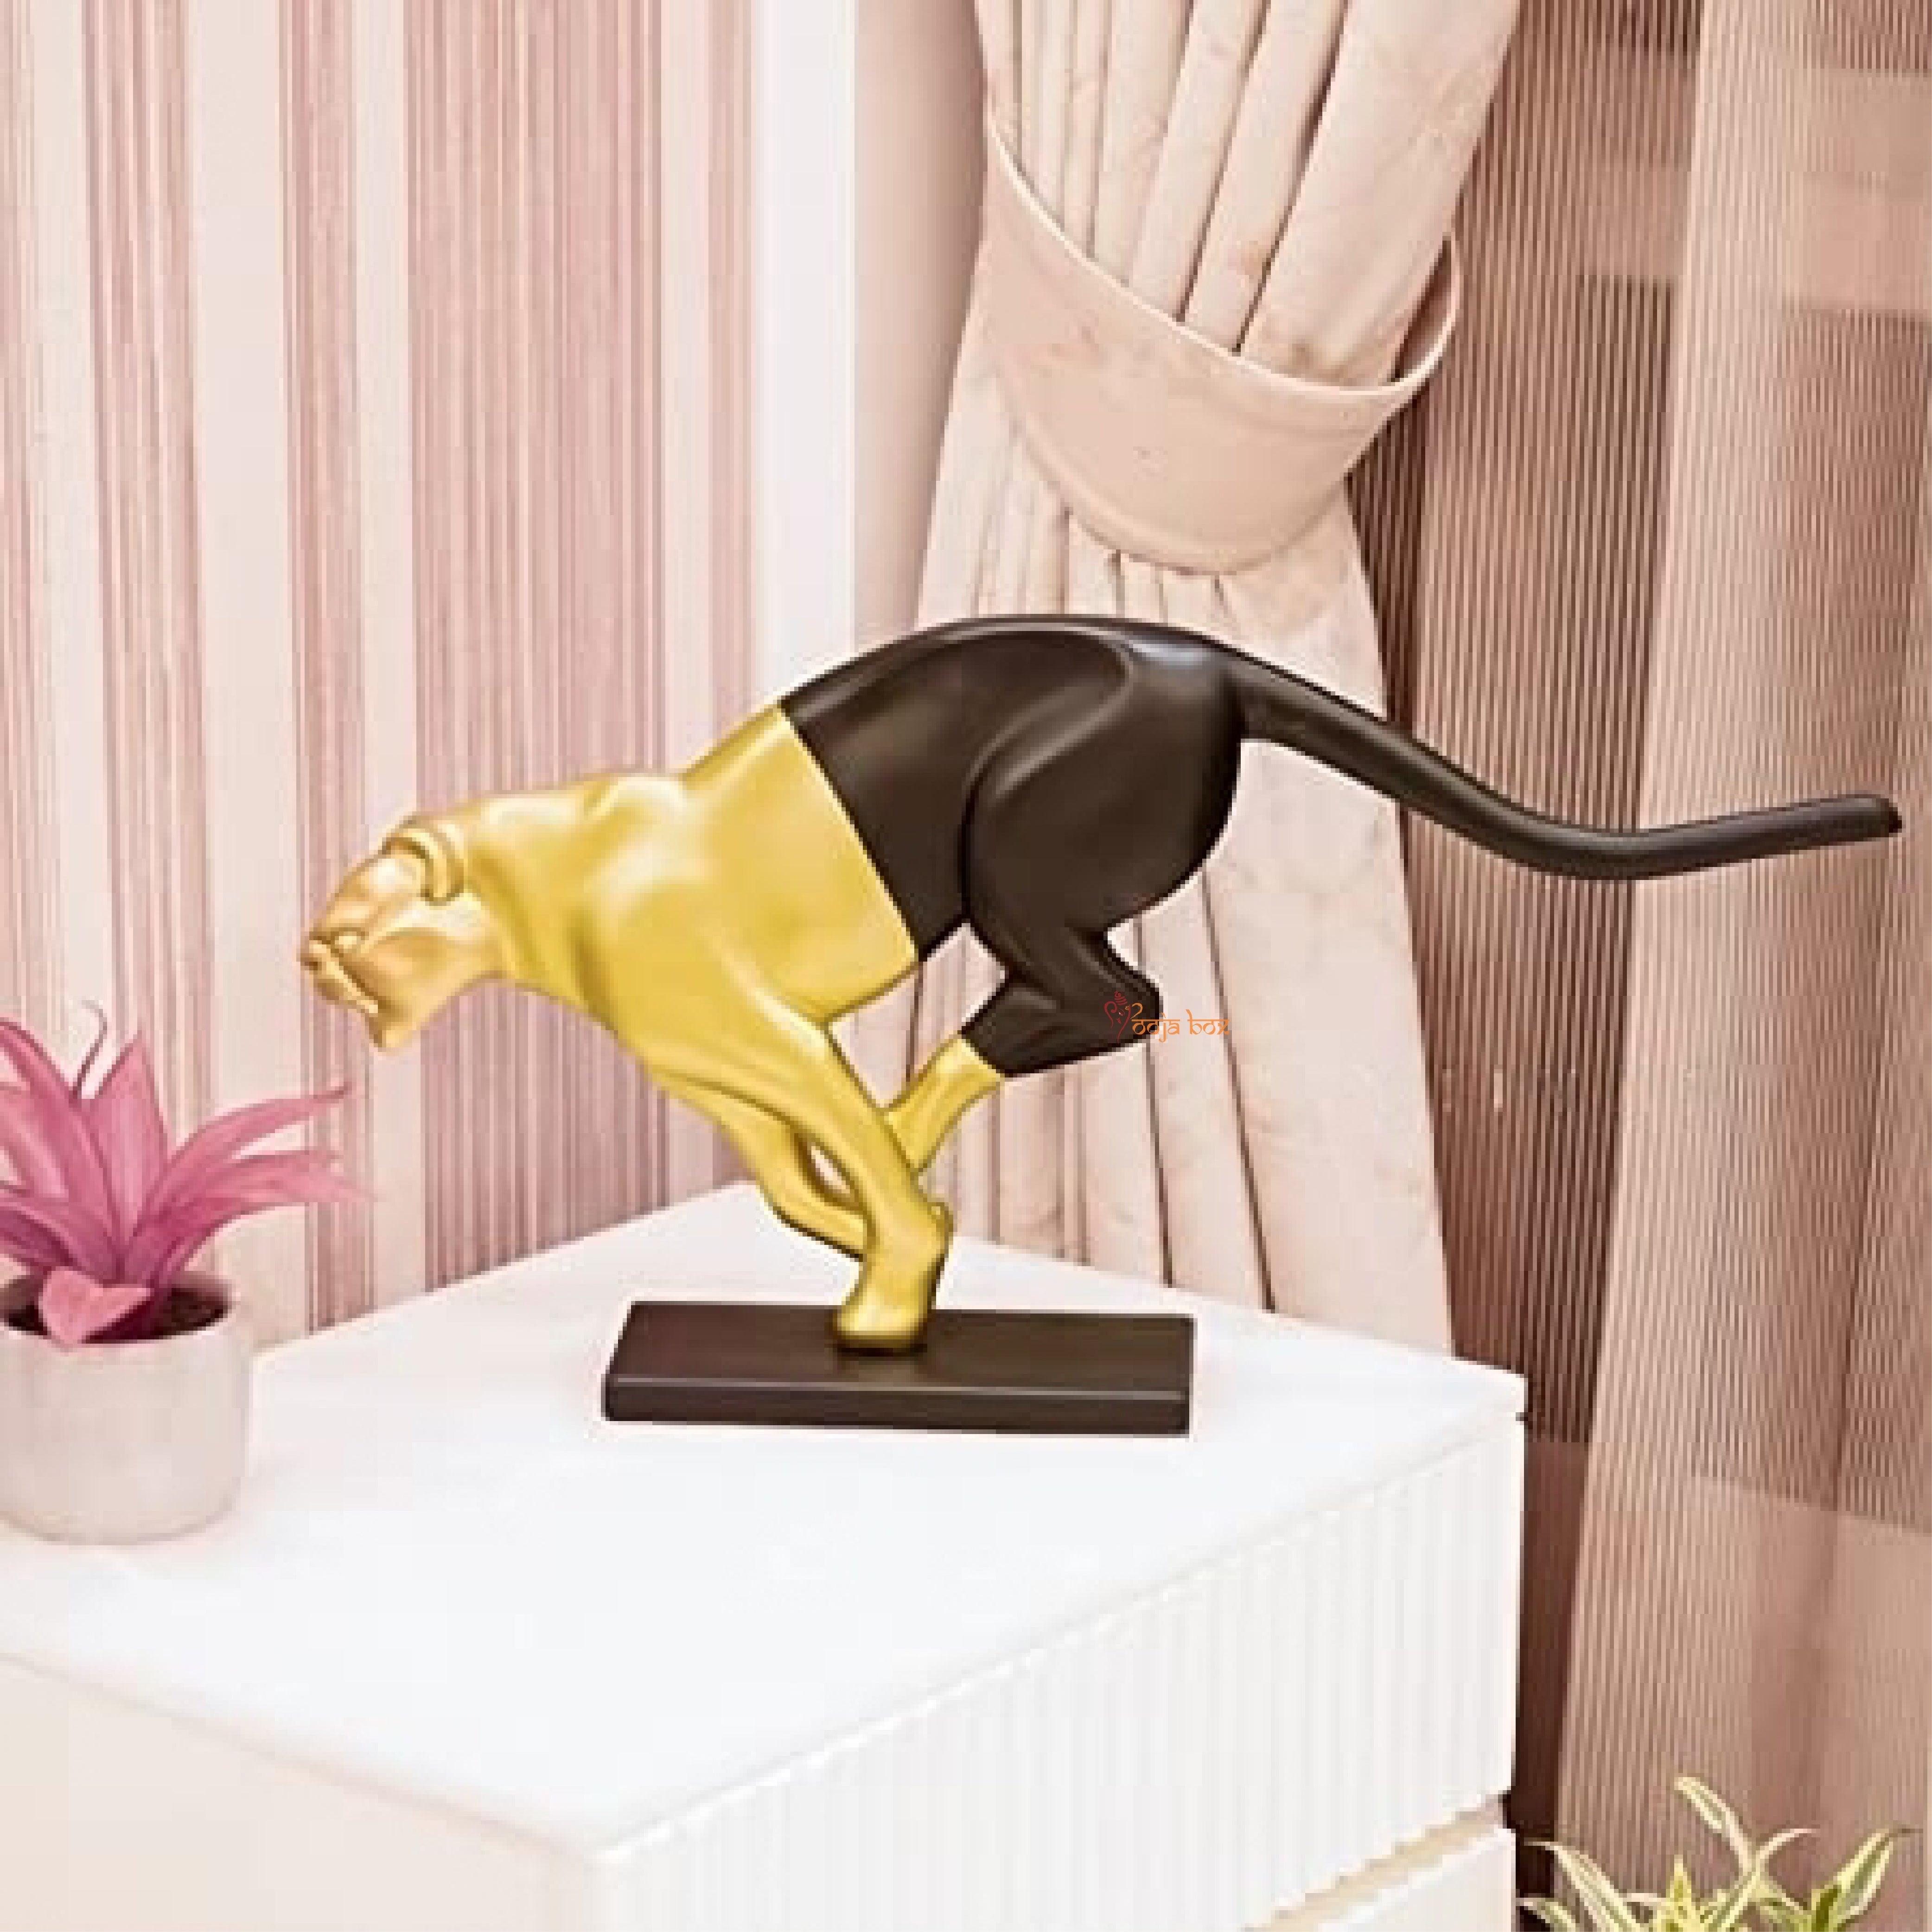 ABSTRACT GRACEFUL PANTHER SCULPTURE